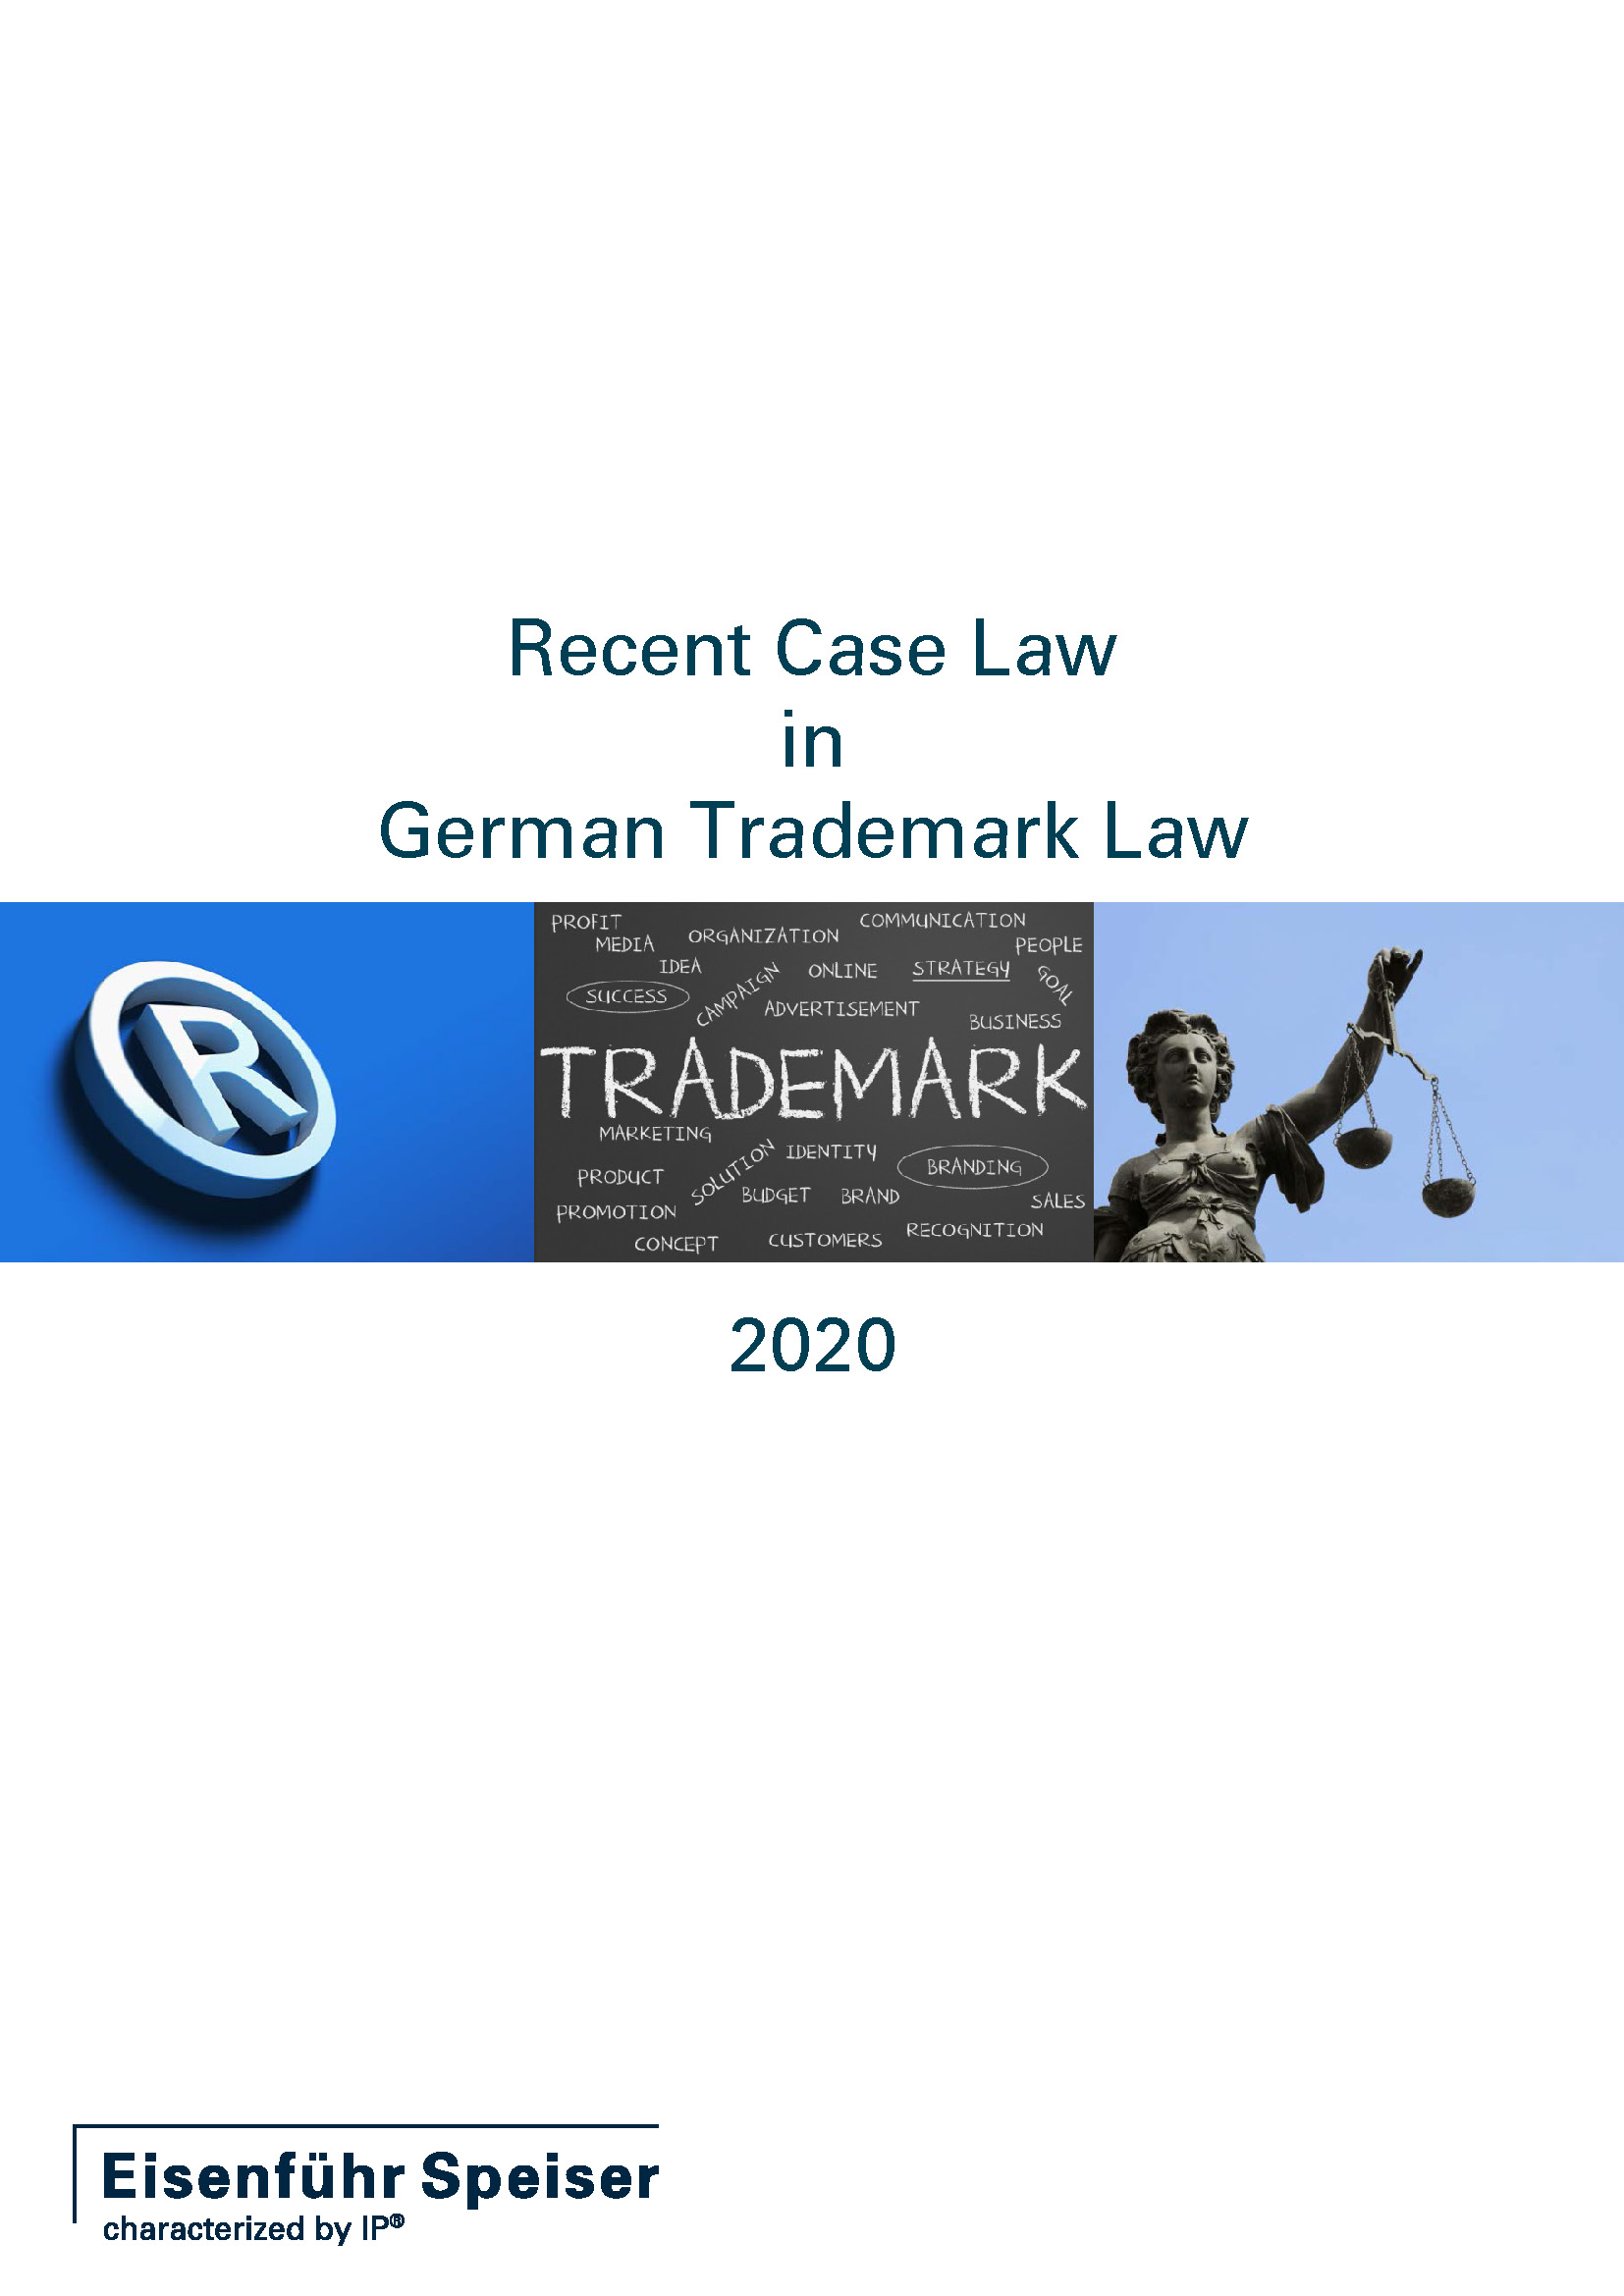 Recent Case Law in German Trademark Law 2020